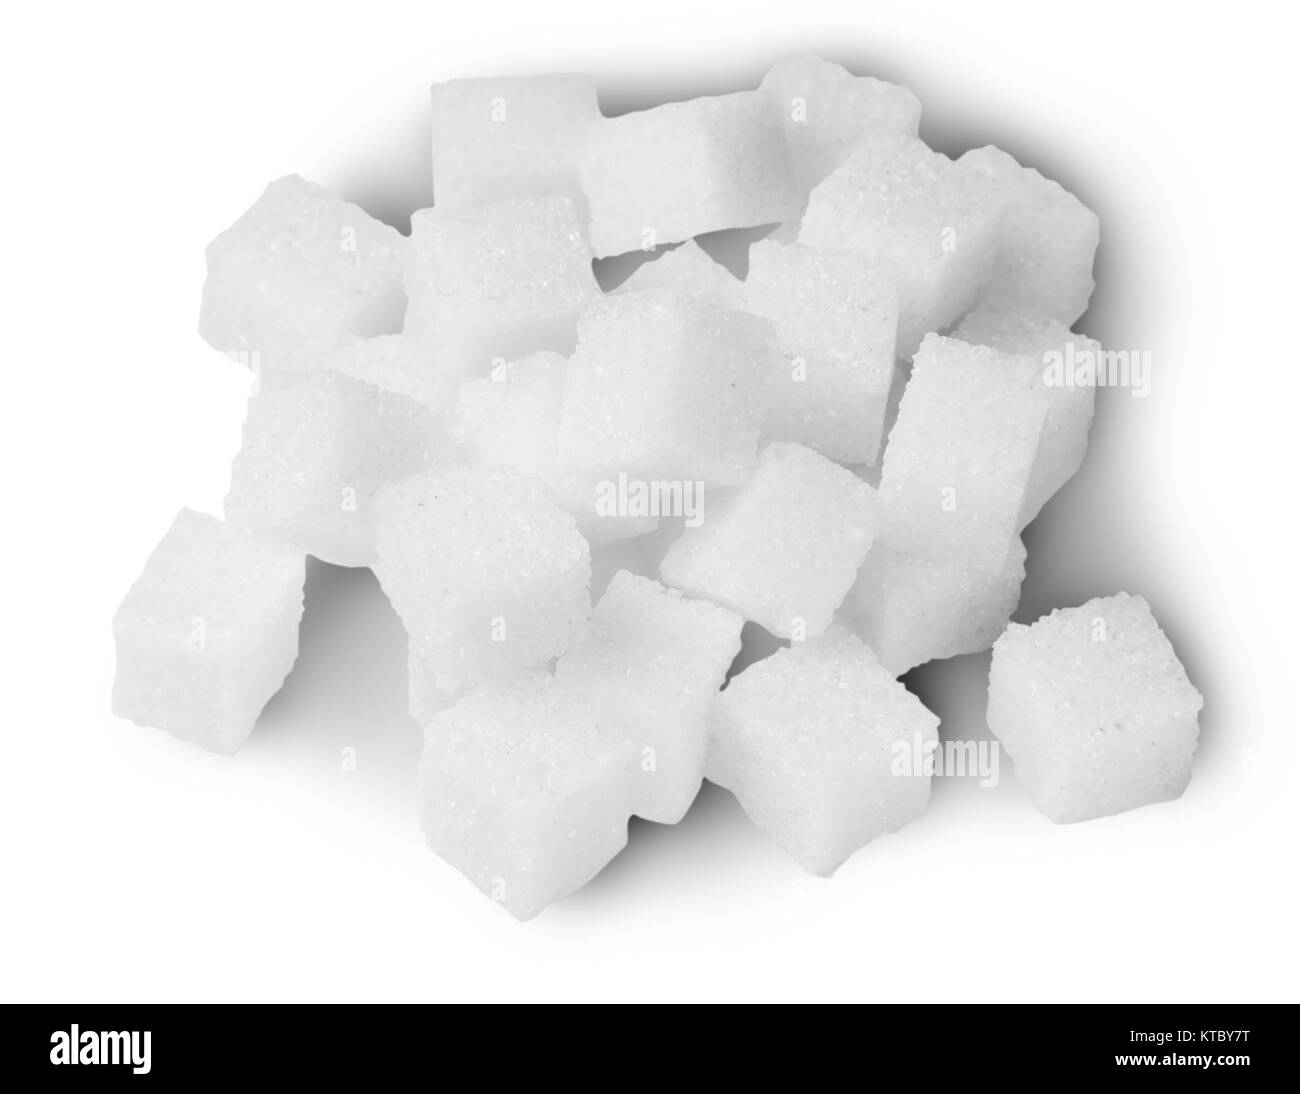 Tea coffee and sugar Black and White Stock Photos & Images - Alamy